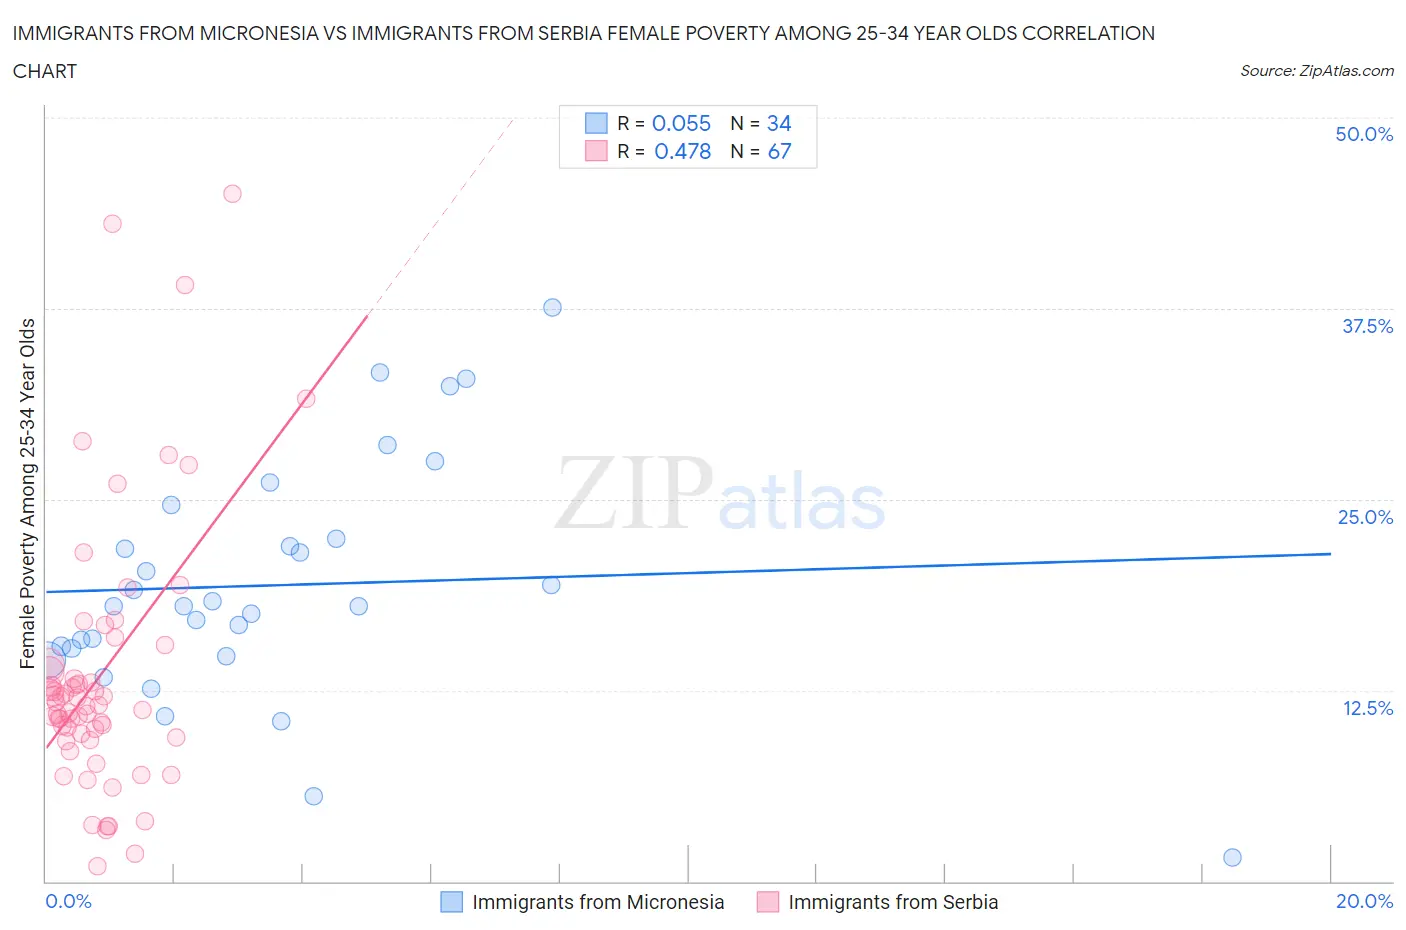 Immigrants from Micronesia vs Immigrants from Serbia Female Poverty Among 25-34 Year Olds